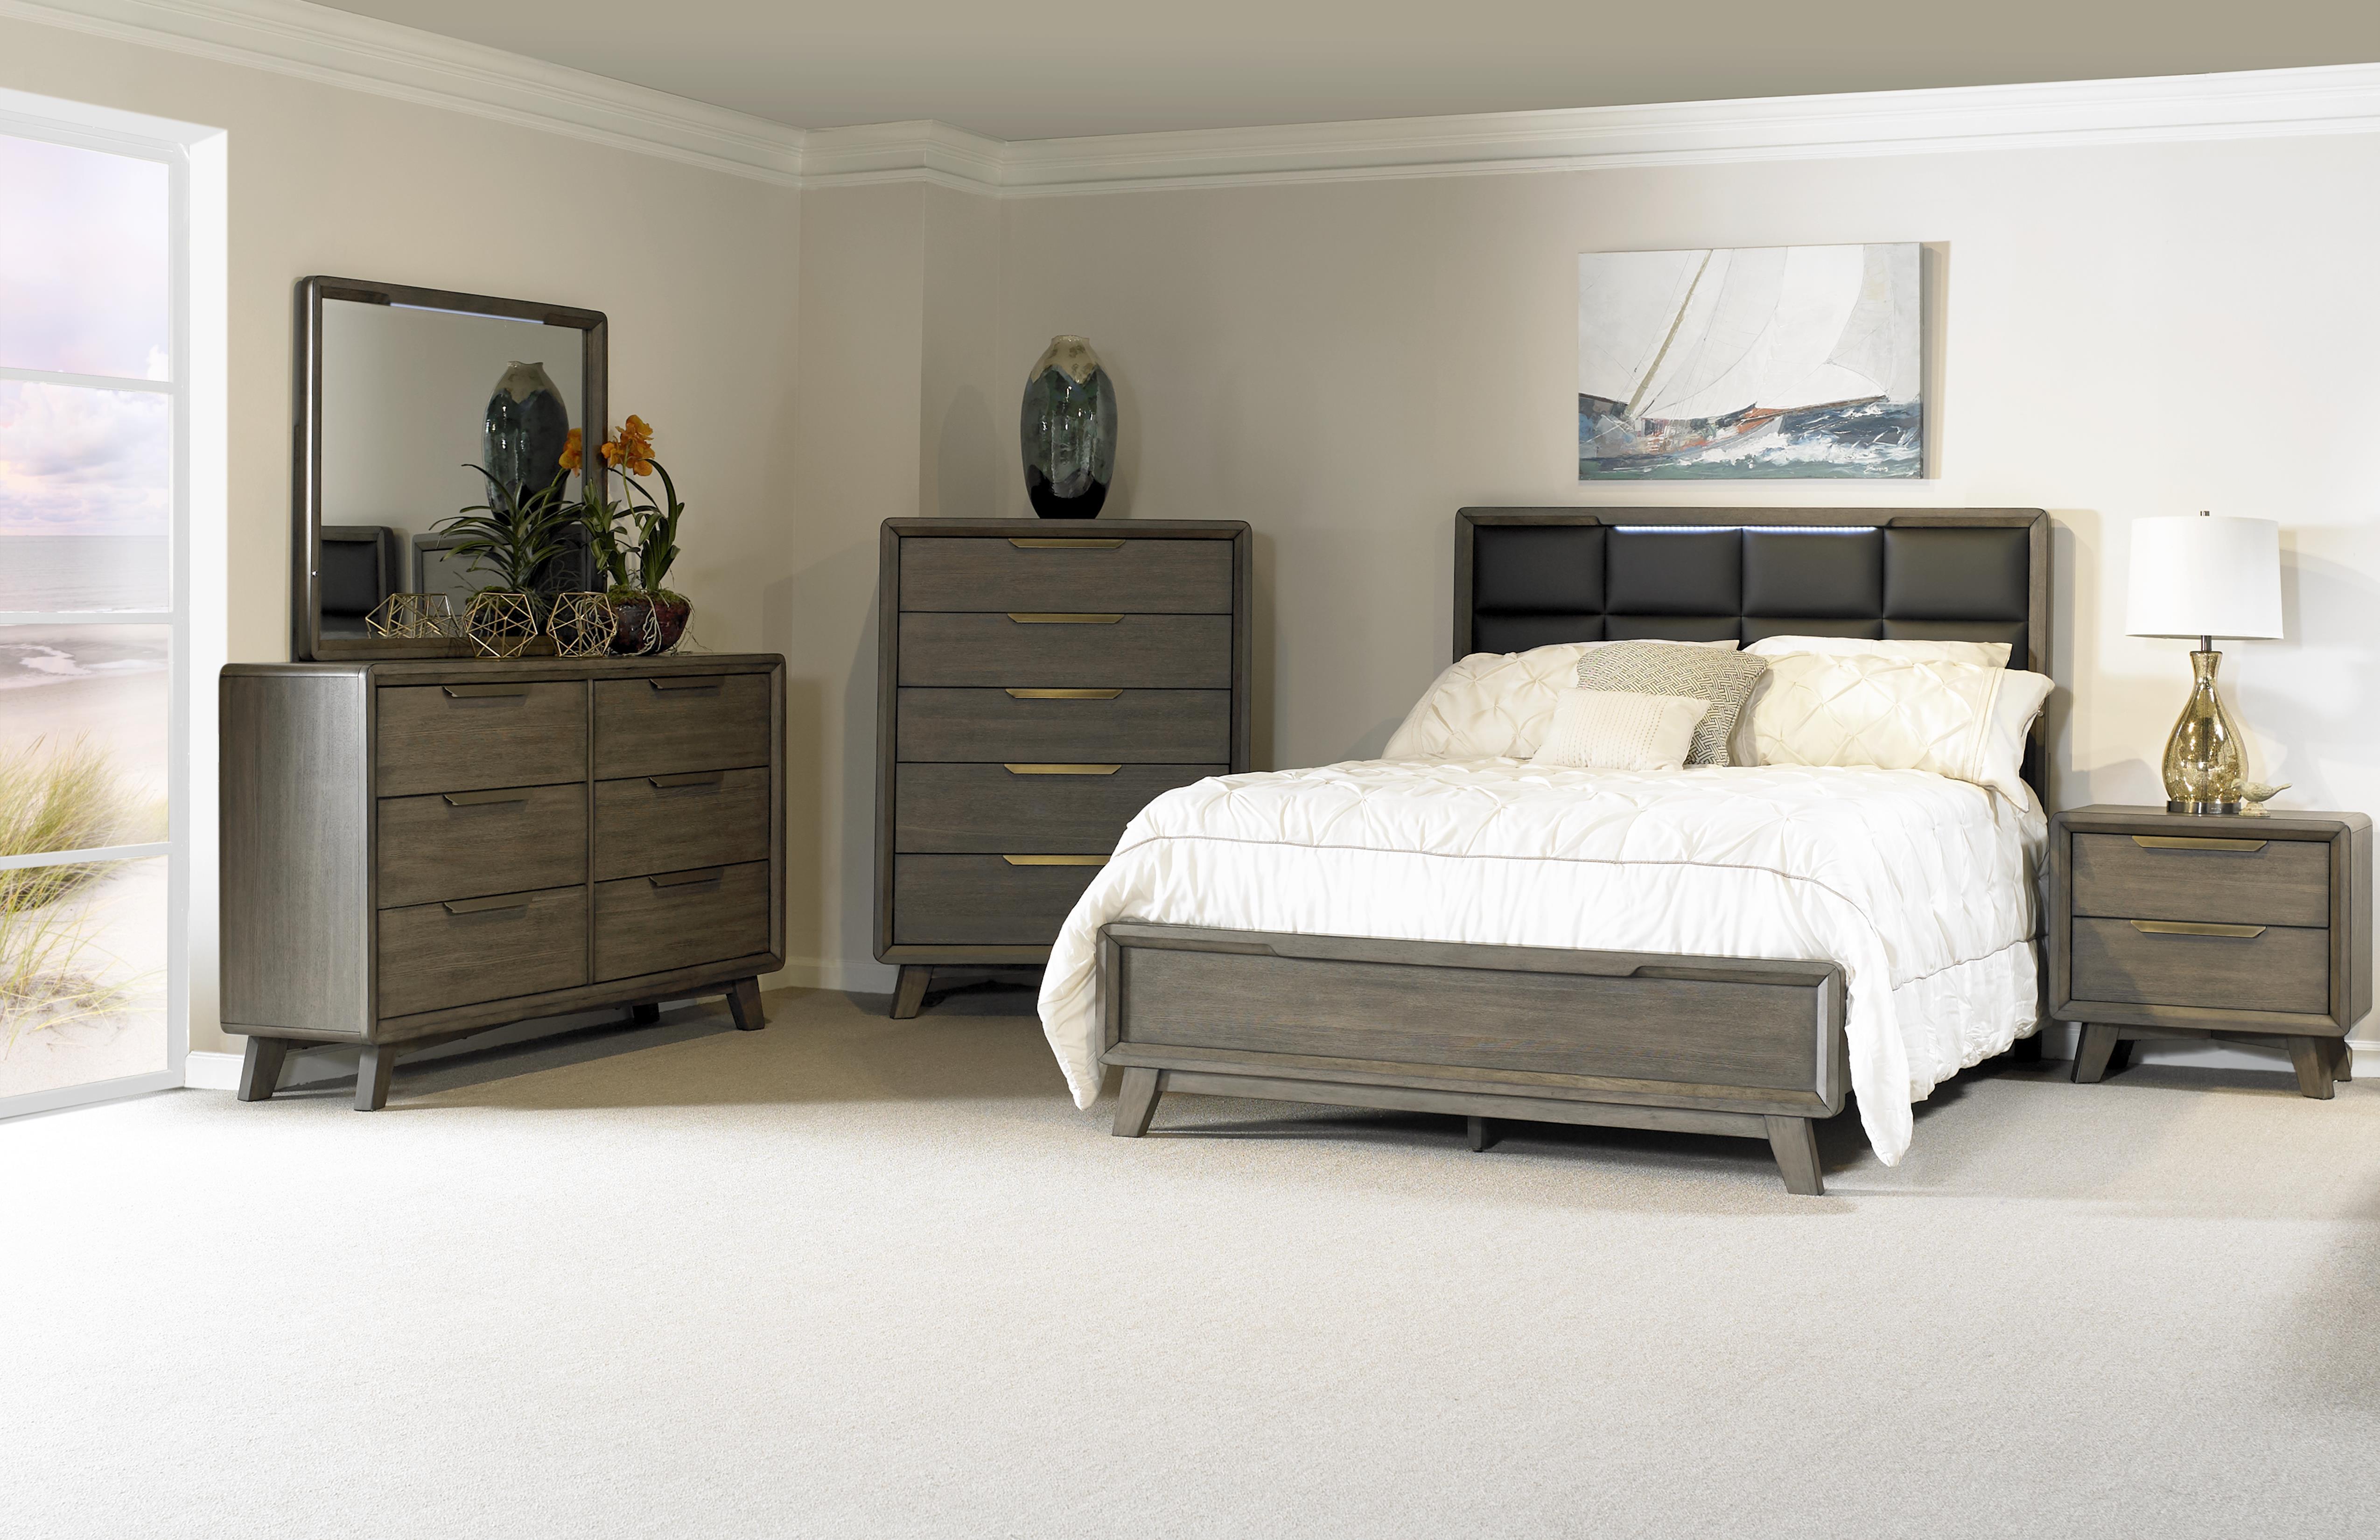 Contemporary, Modern Panel Bedroom Set VALENCIA 213-105-Set-5 213-105-2NDM-5PC in Coffee, Brown Faux Leather